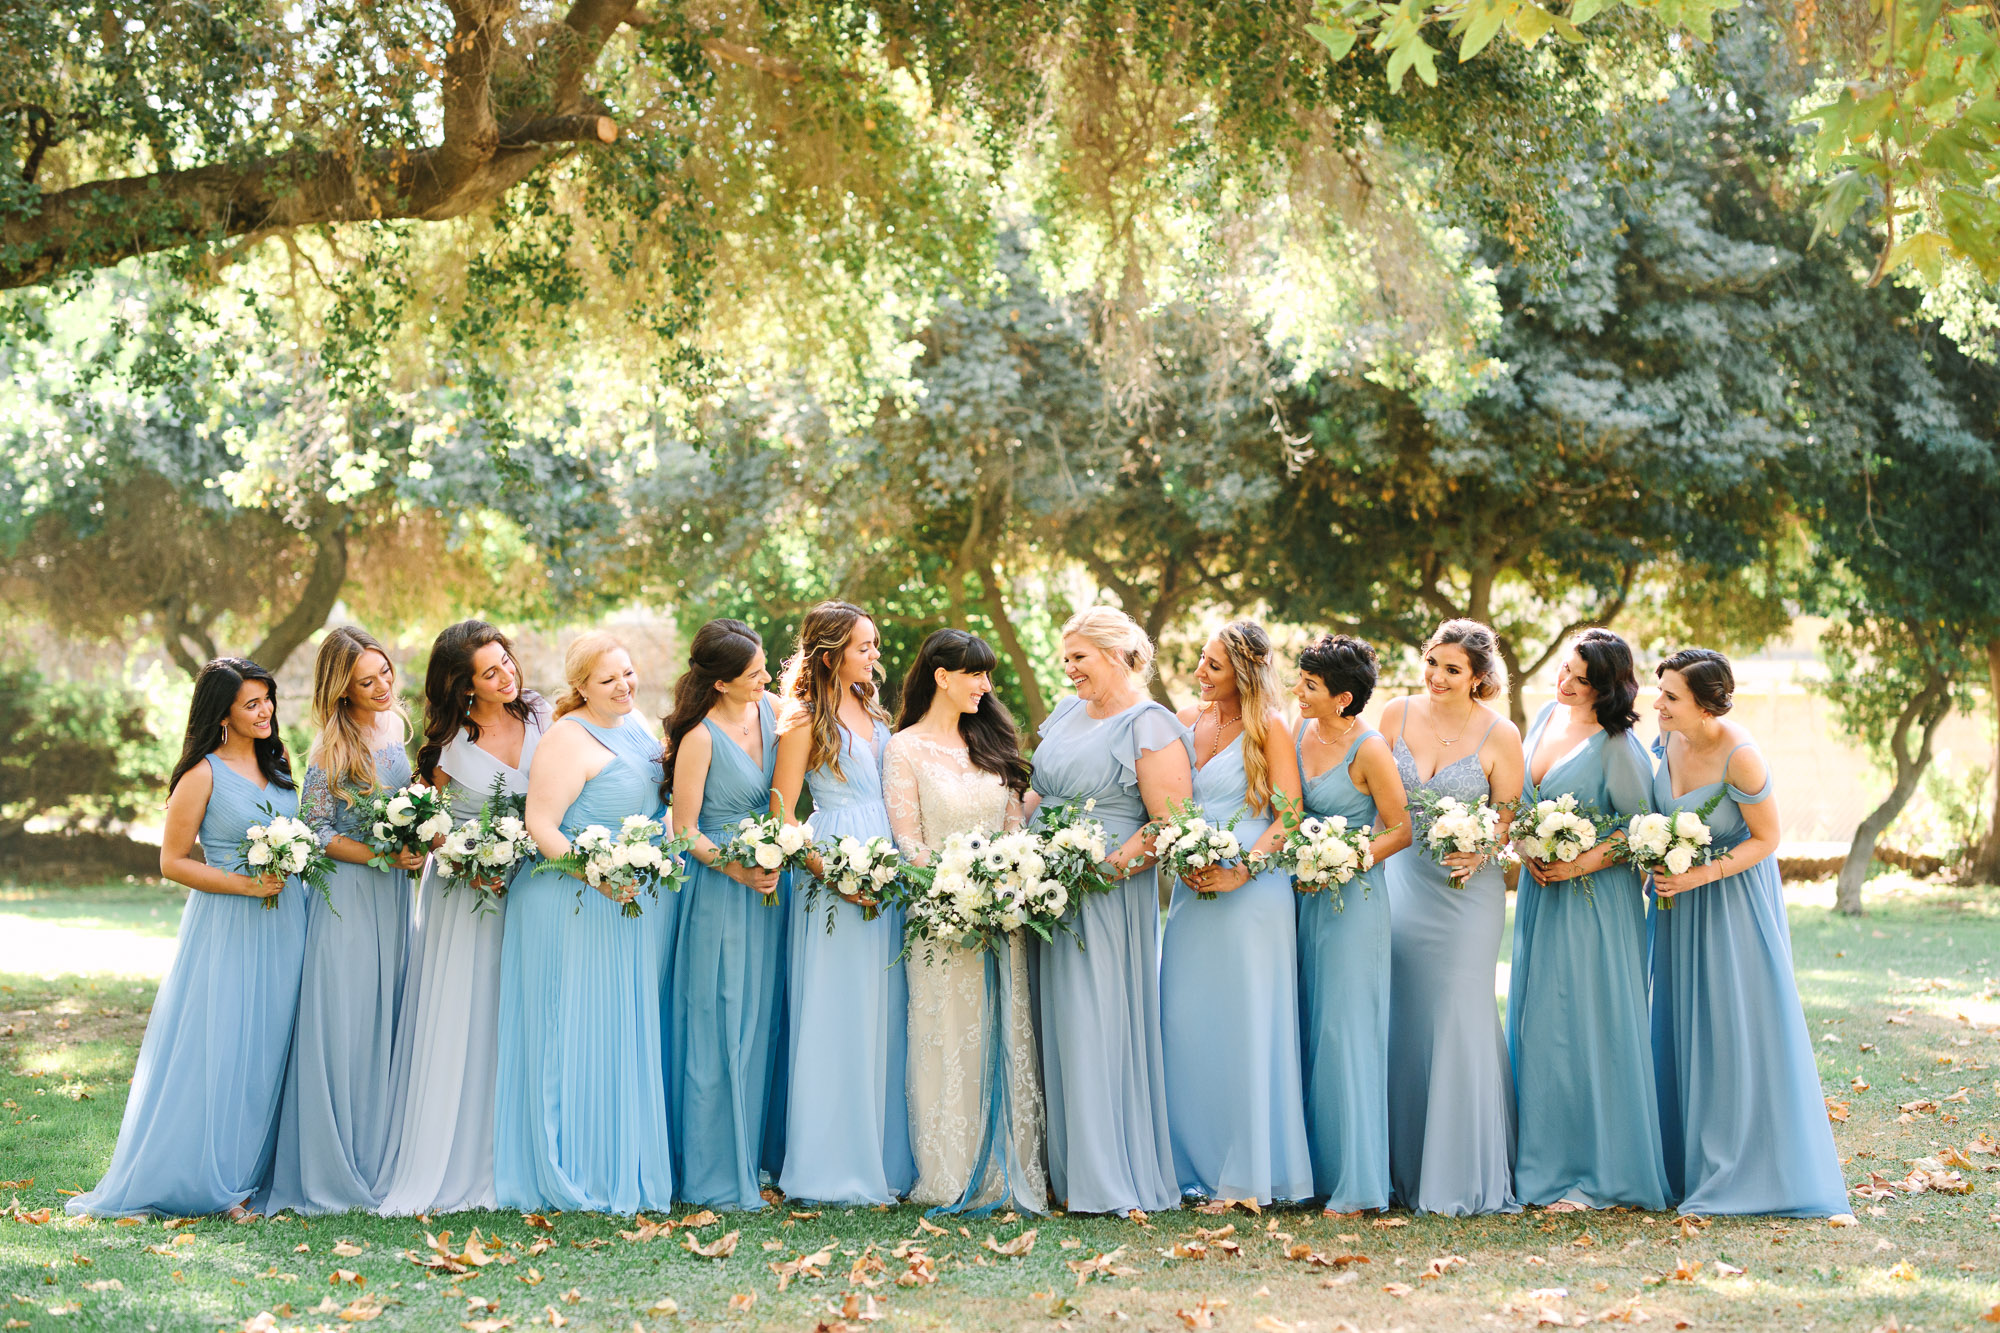 Bridesmaids in mismatched blue dresses by Mary Costa Photography